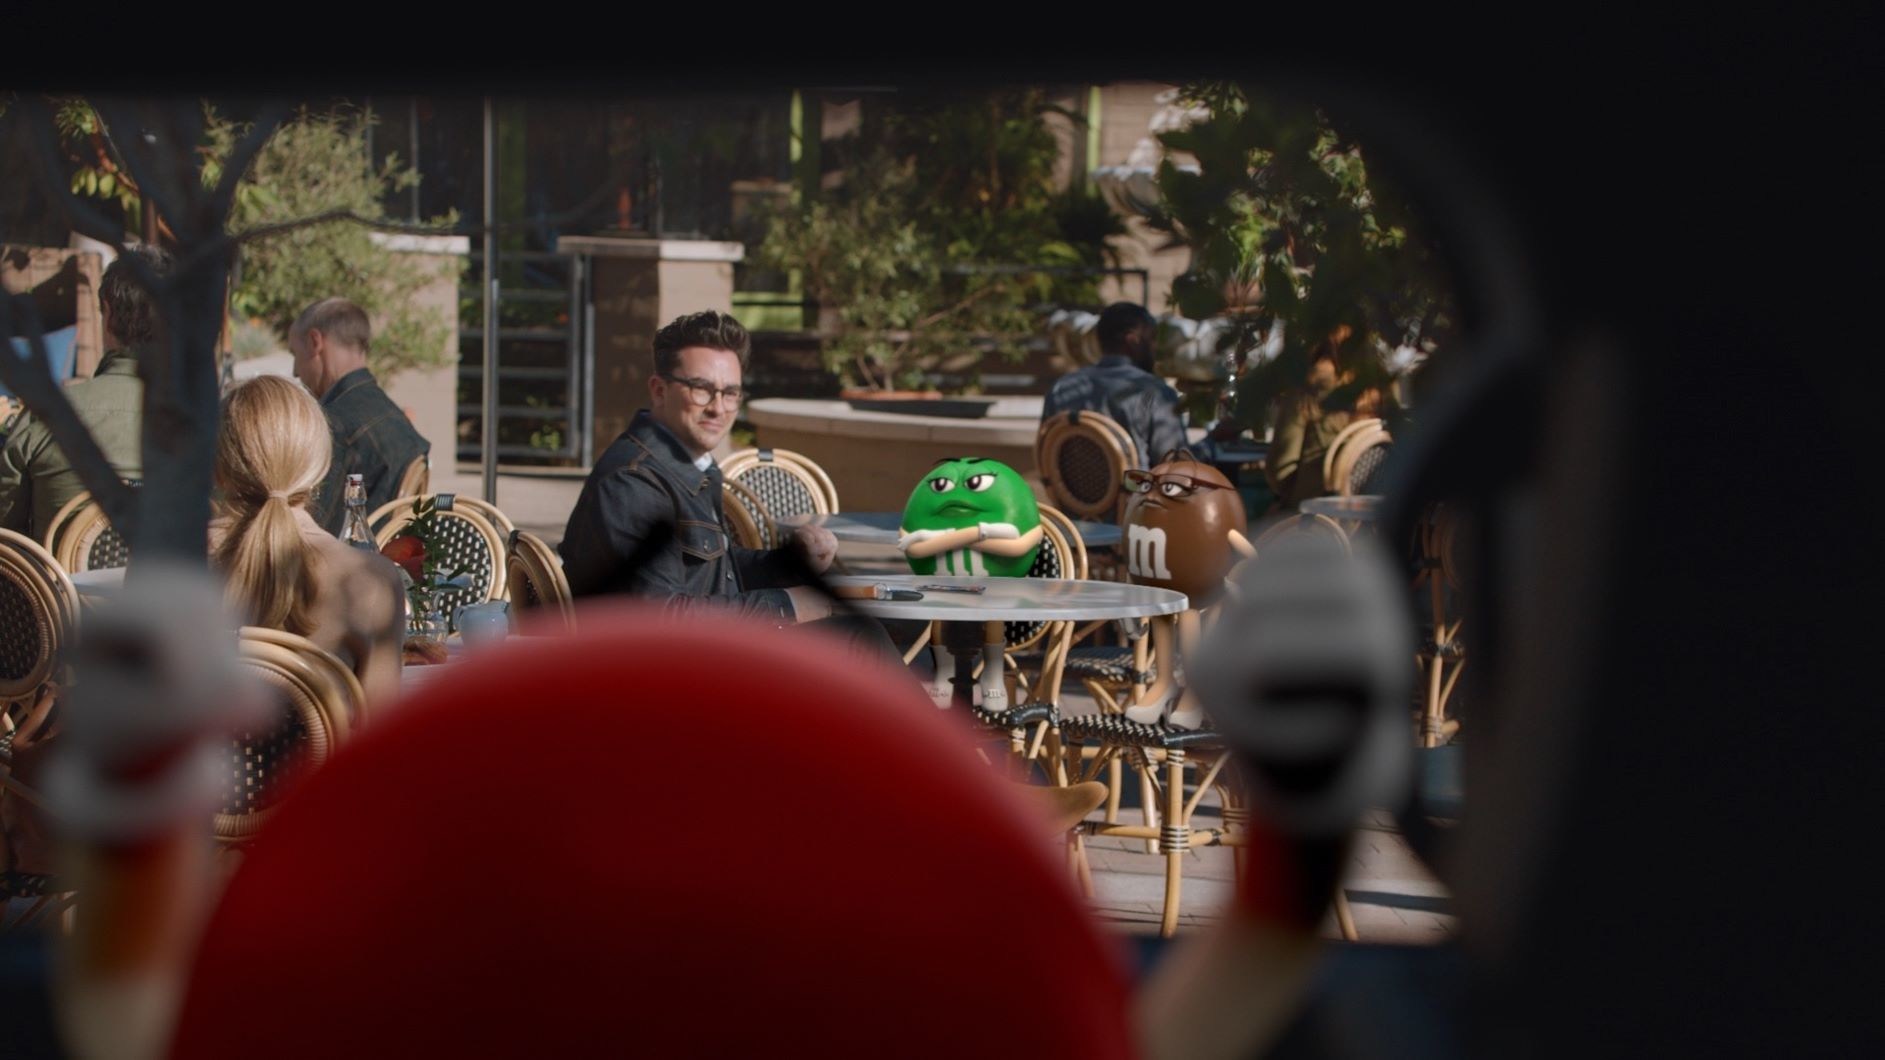 M&M’s seeks to make people smile in new Super Bowl ad featuring Dan Levy via BBDO New York